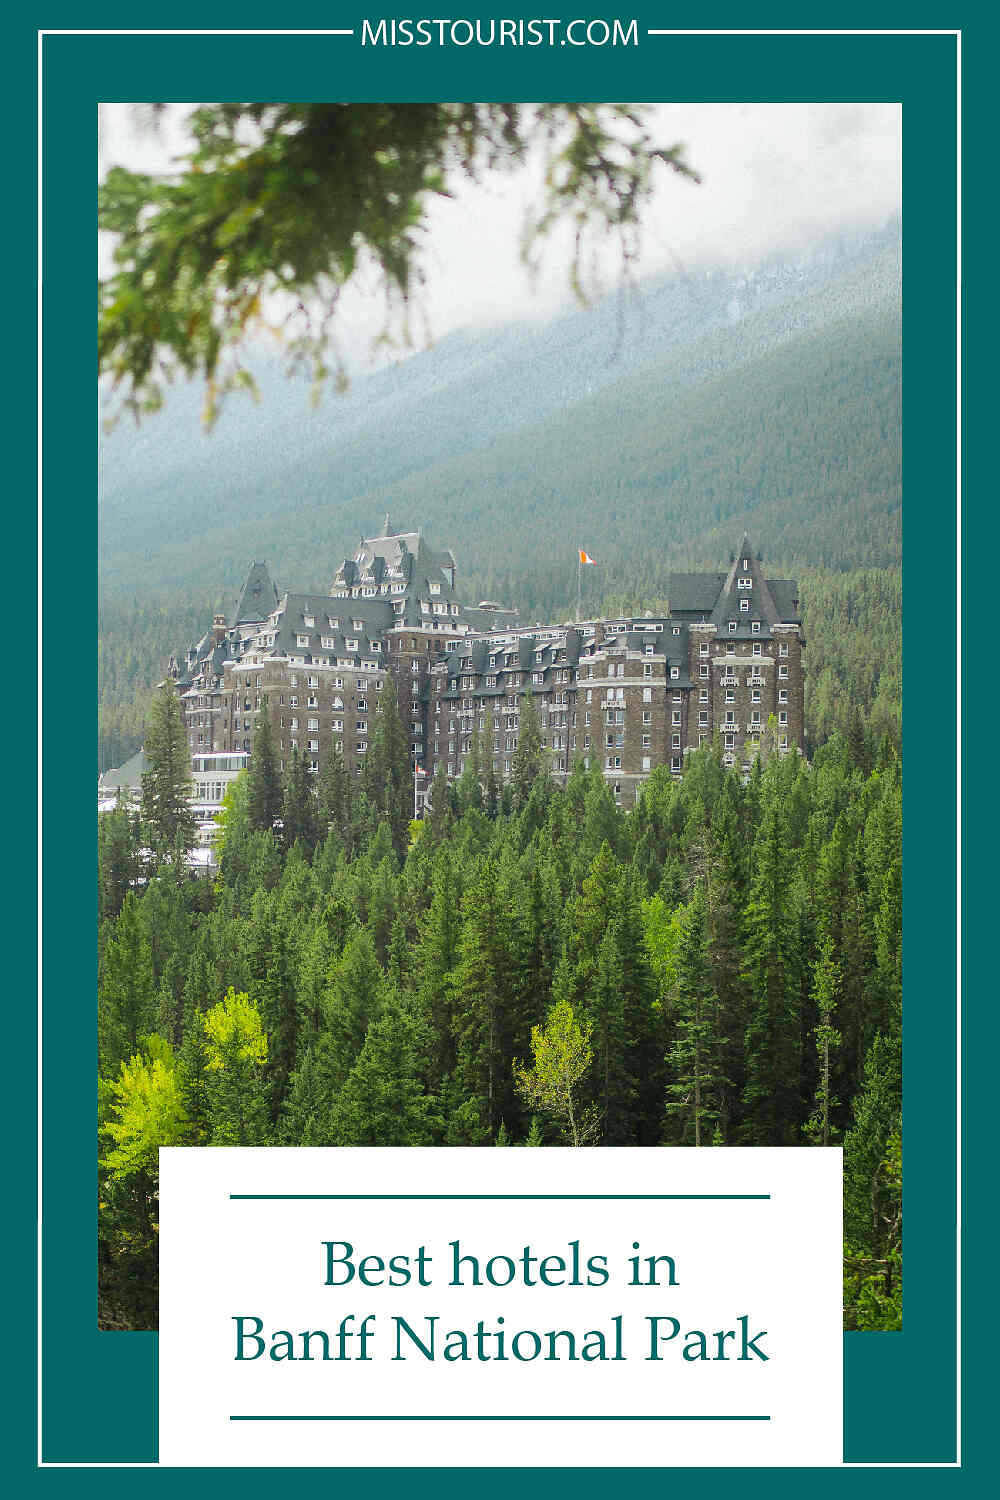 Where to stay in Banff pin 2